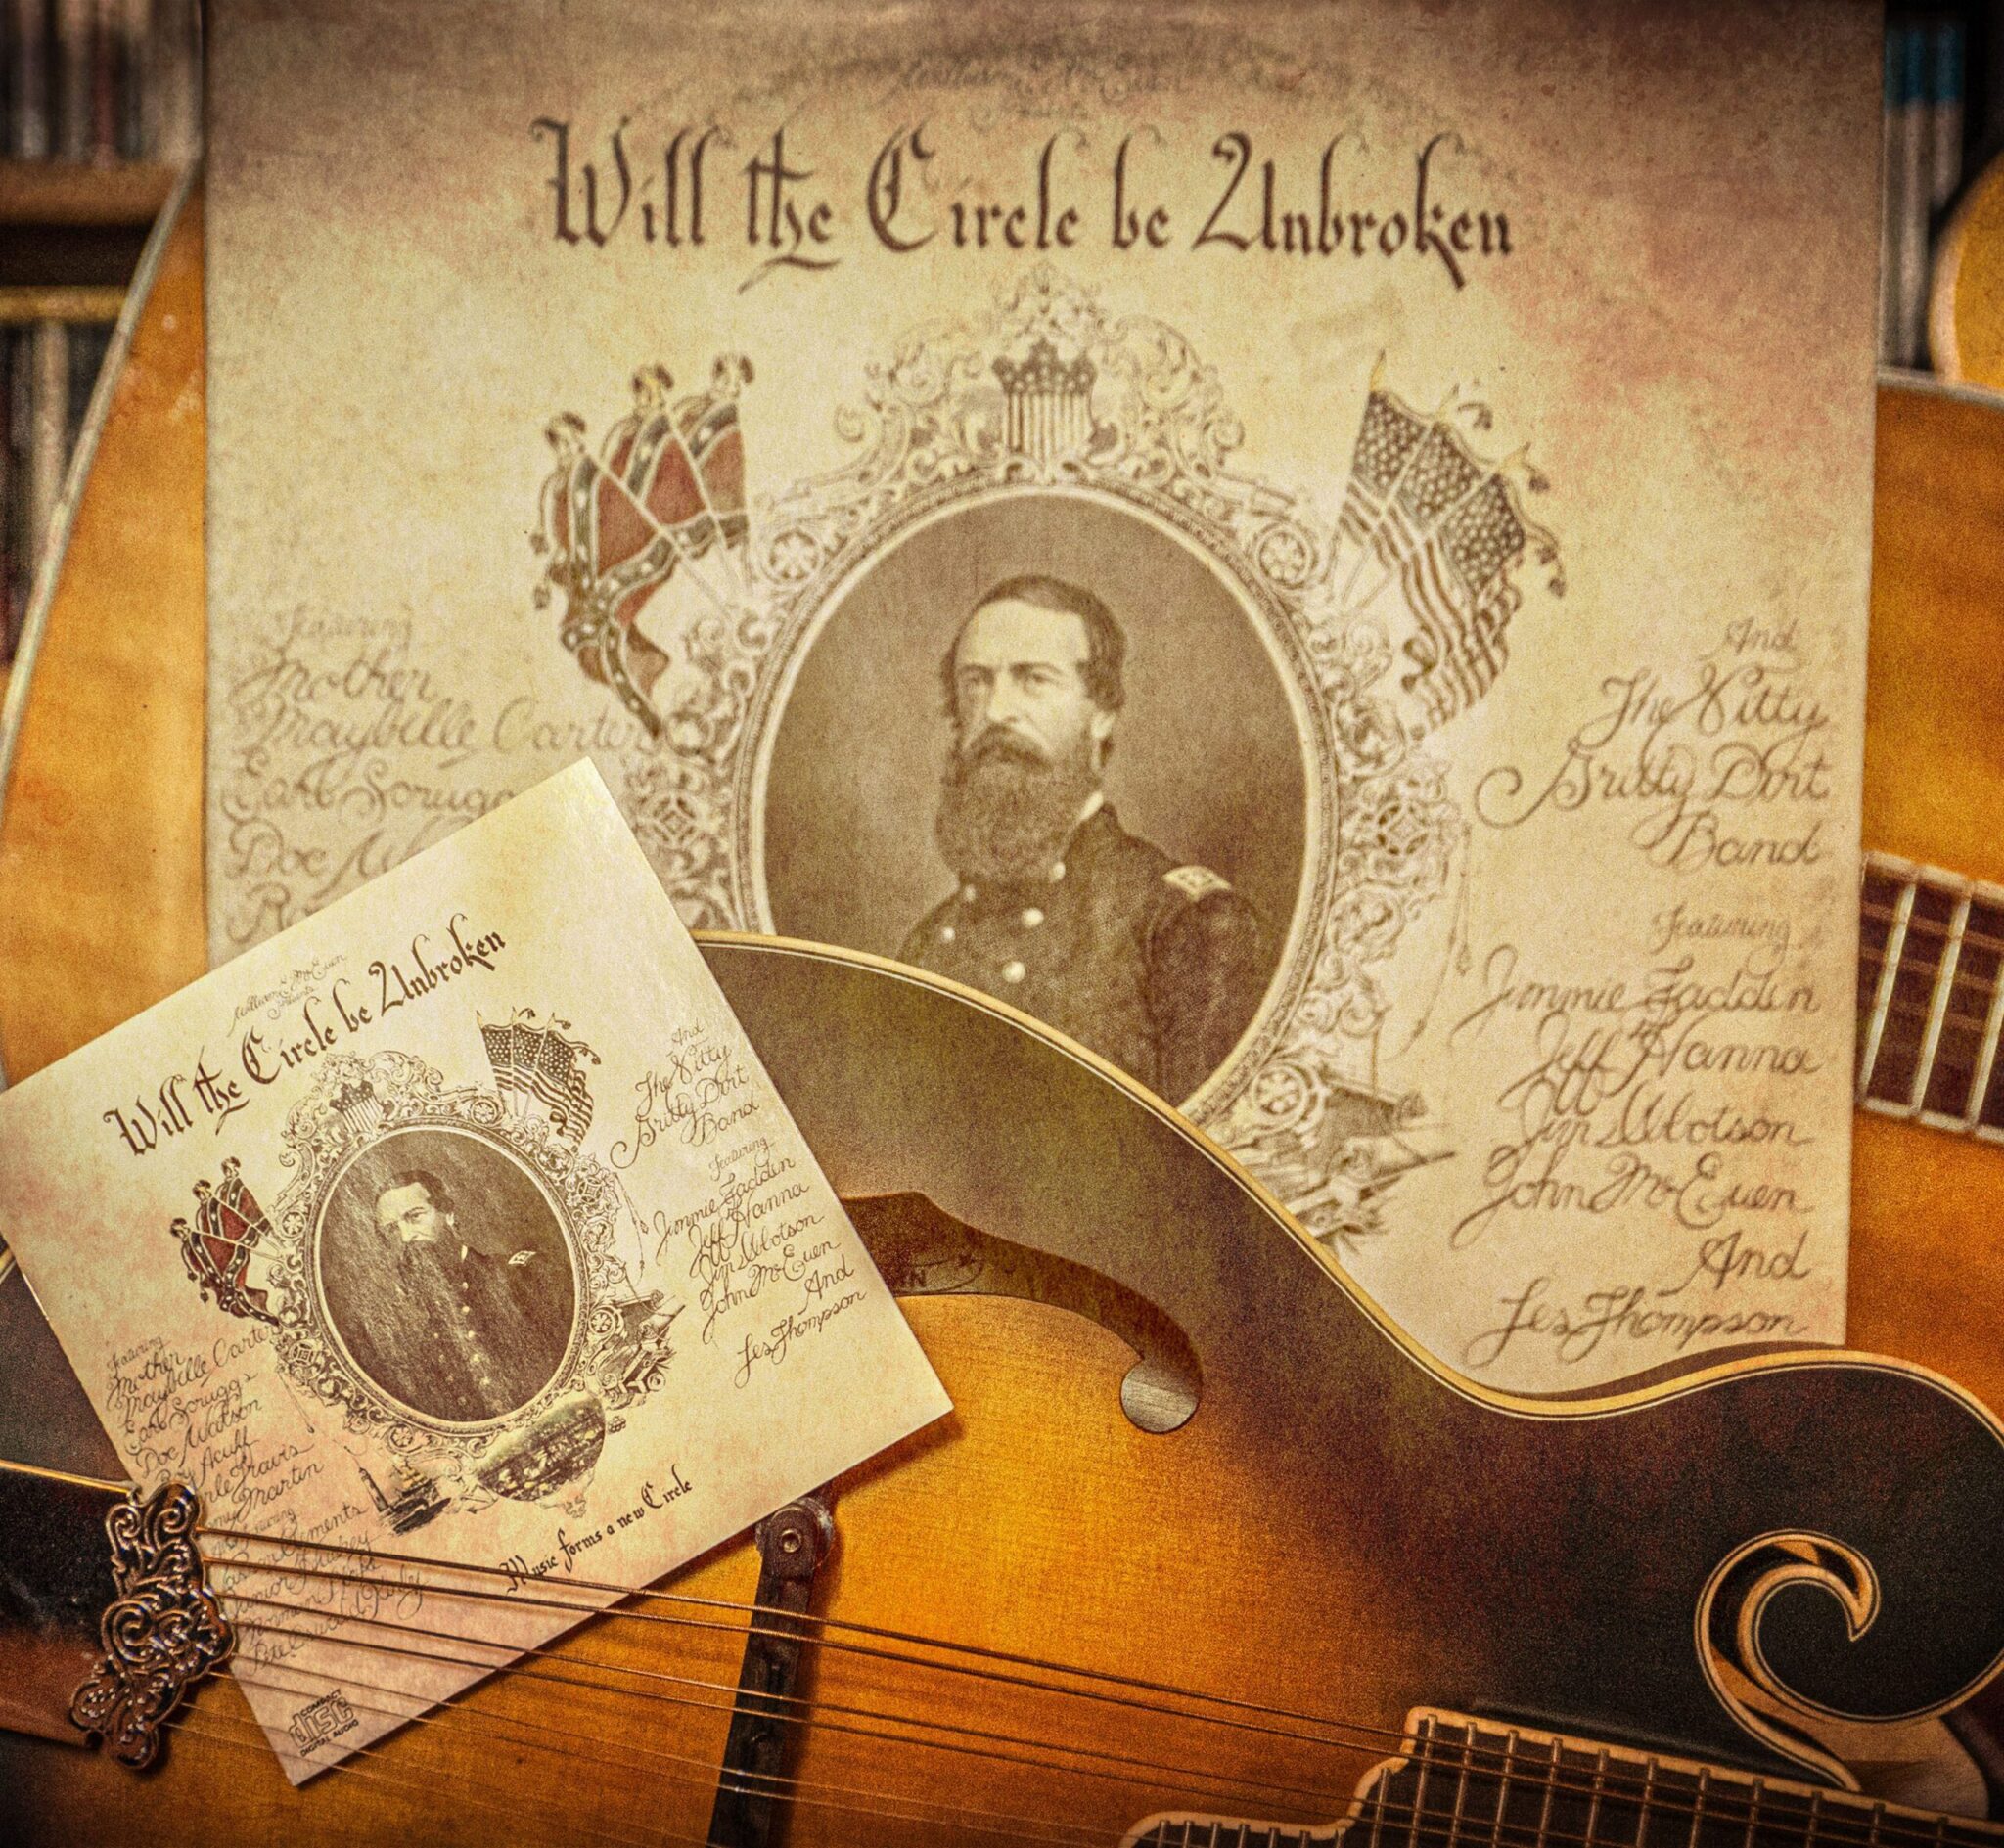 Nitty Gritty Dirt Band + Varius Artists: “Will The Circle Be Unbroken recensione Antonio Boschi